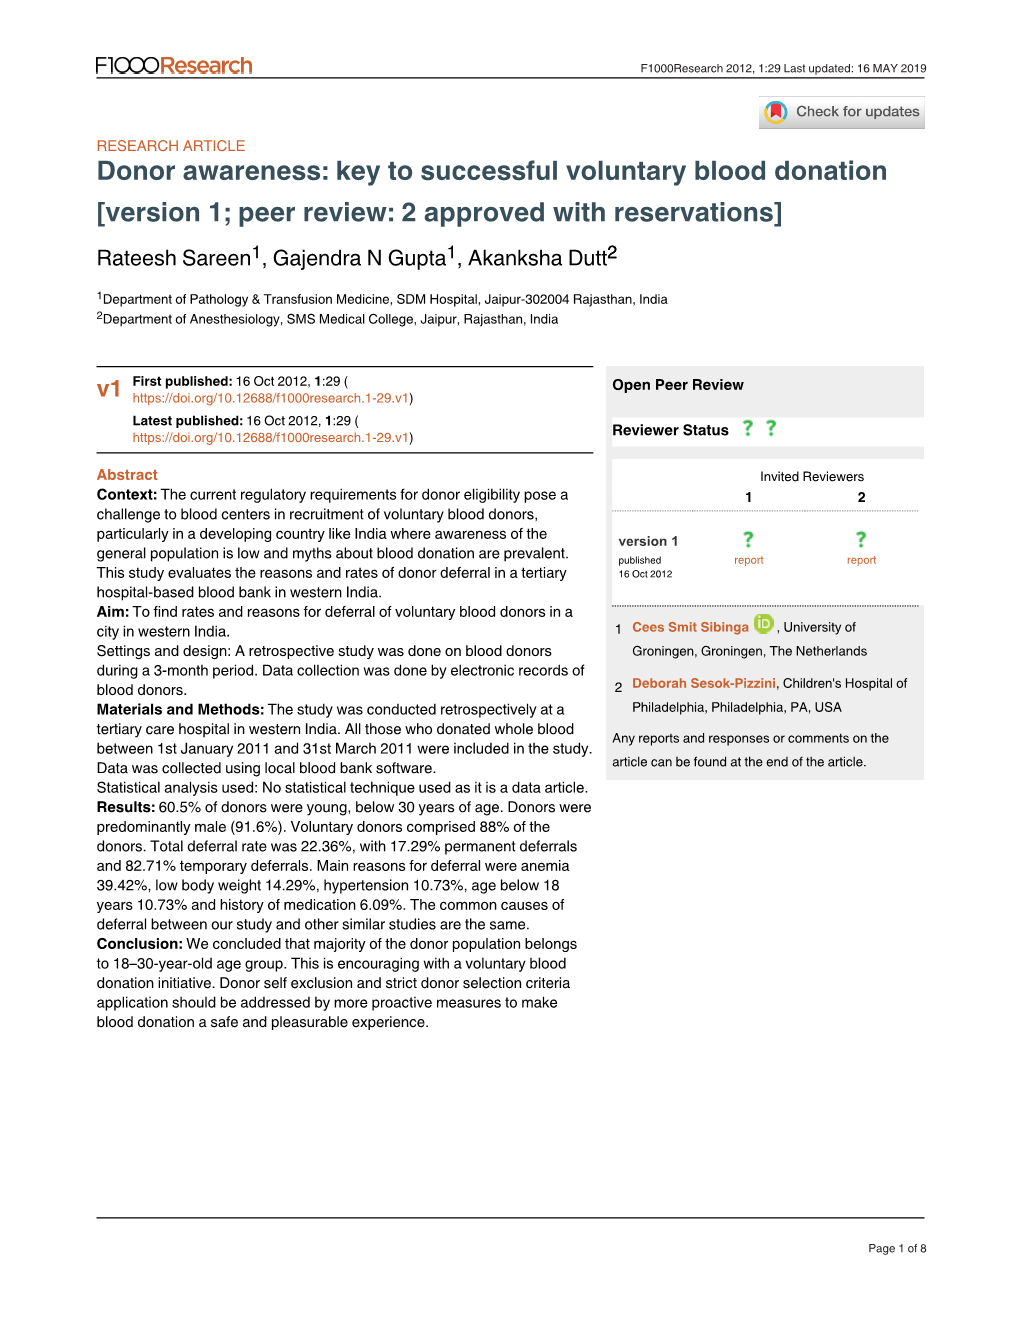 Donor Awareness: Key to Successful Voluntary Blood Donation [Version 1; Peer Review: 2 Approved with Reservations] Rateesh Sareen1, Gajendra N Gupta1, Akanksha Dutt2